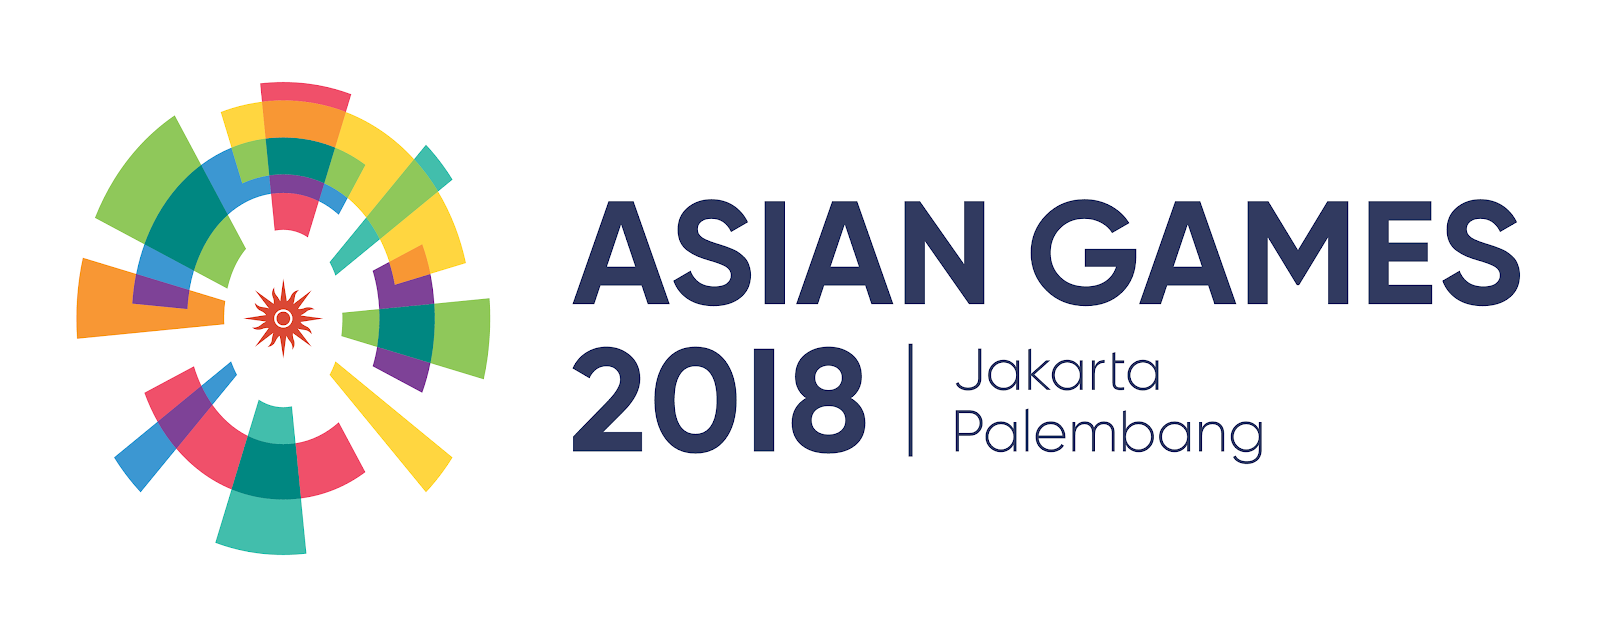 2018 Asian Games Logo Pictures